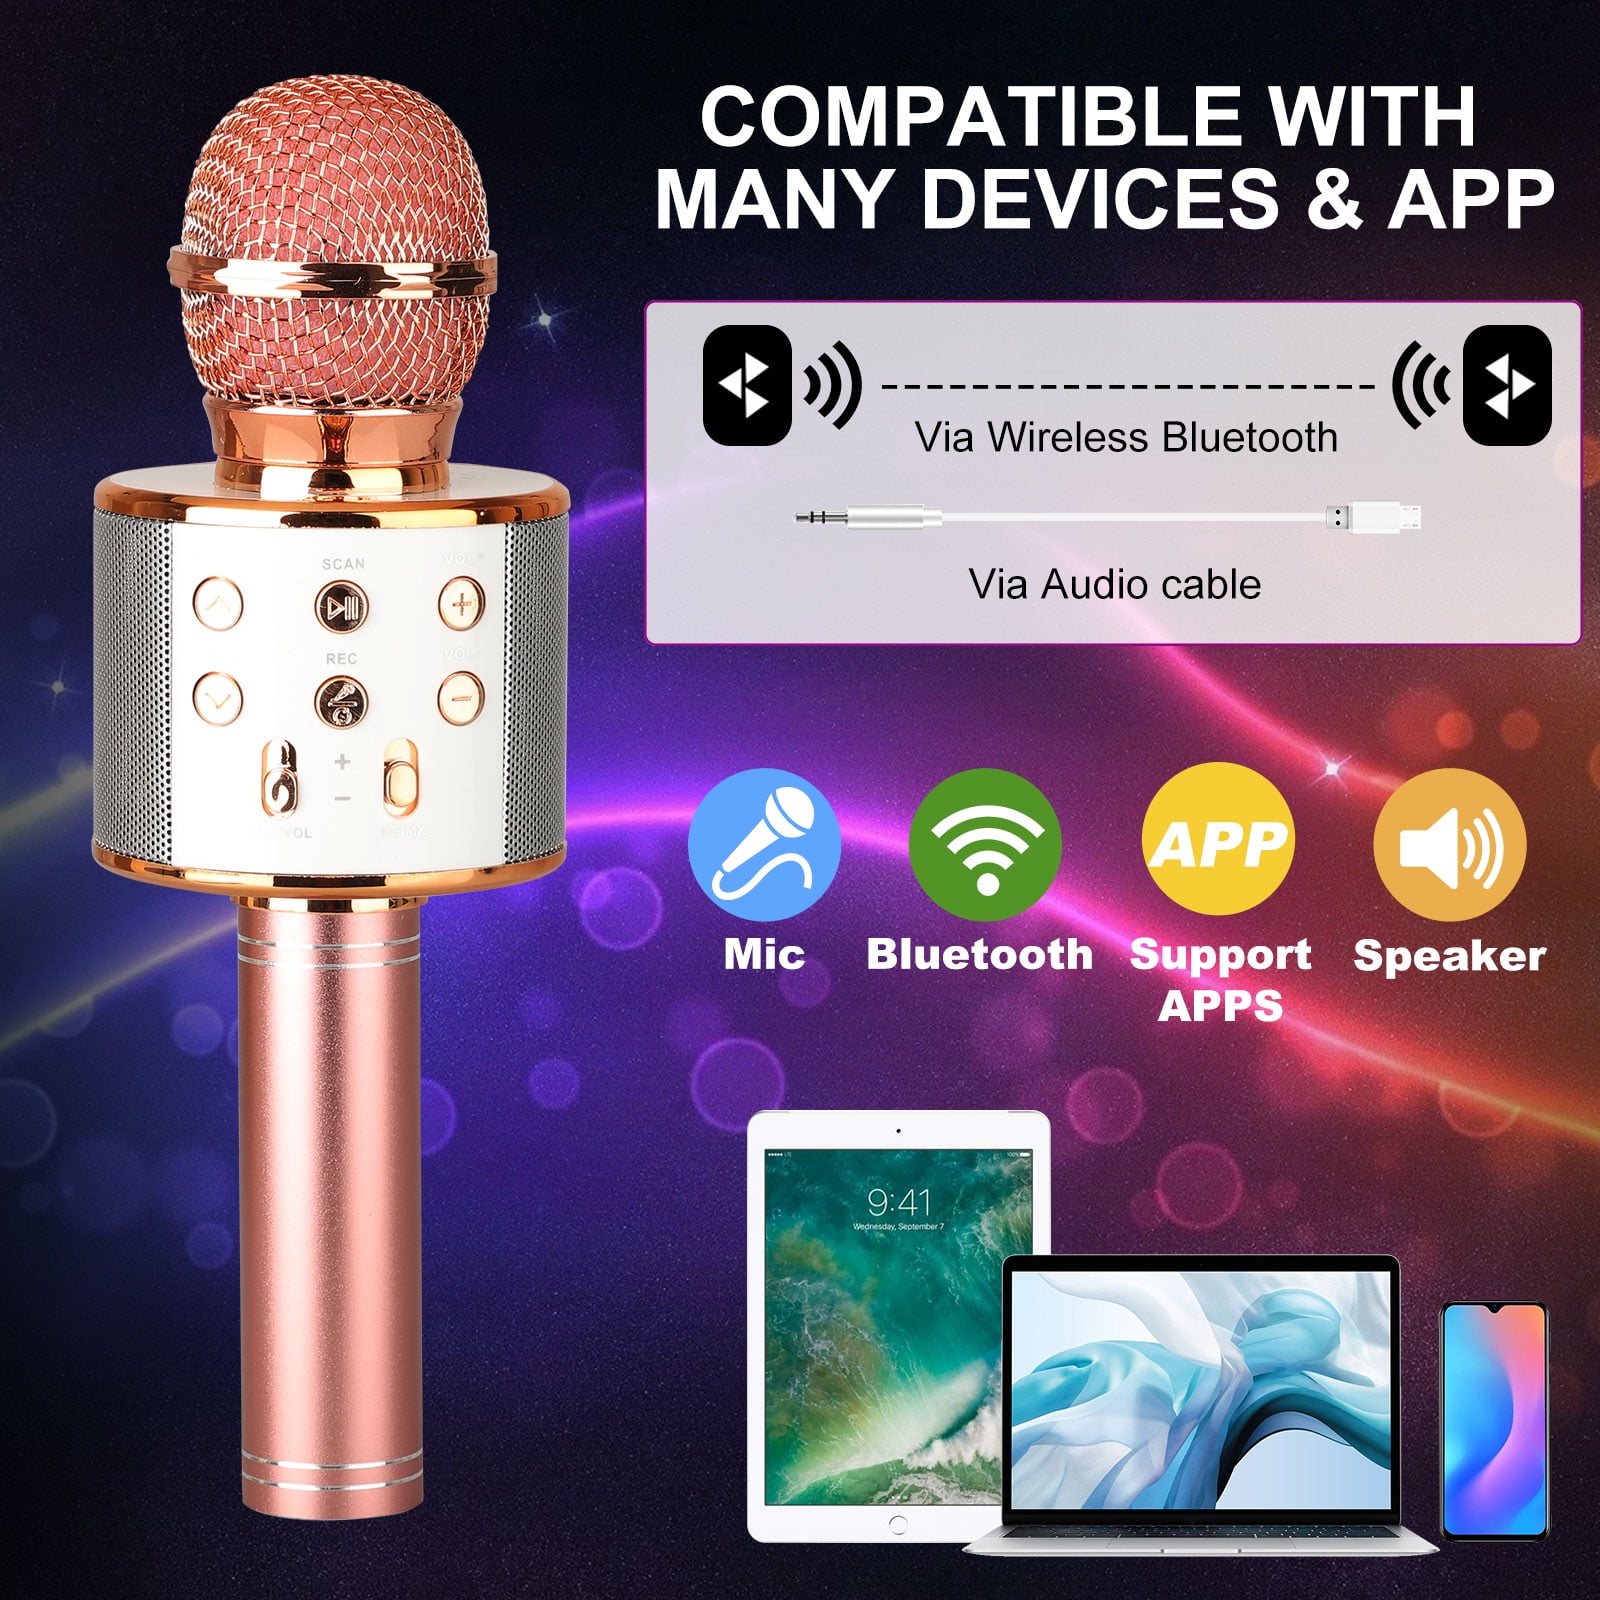 Bluetooth Karaoke Microphone，YKSINX 4-in-1 Speaker Wireless Karaoke Microphone Portable for Home KTV/Outdoor Party/Singing/Recording,Compatible with iPhone/Android/iPad/PC Recorder Voice Changer 